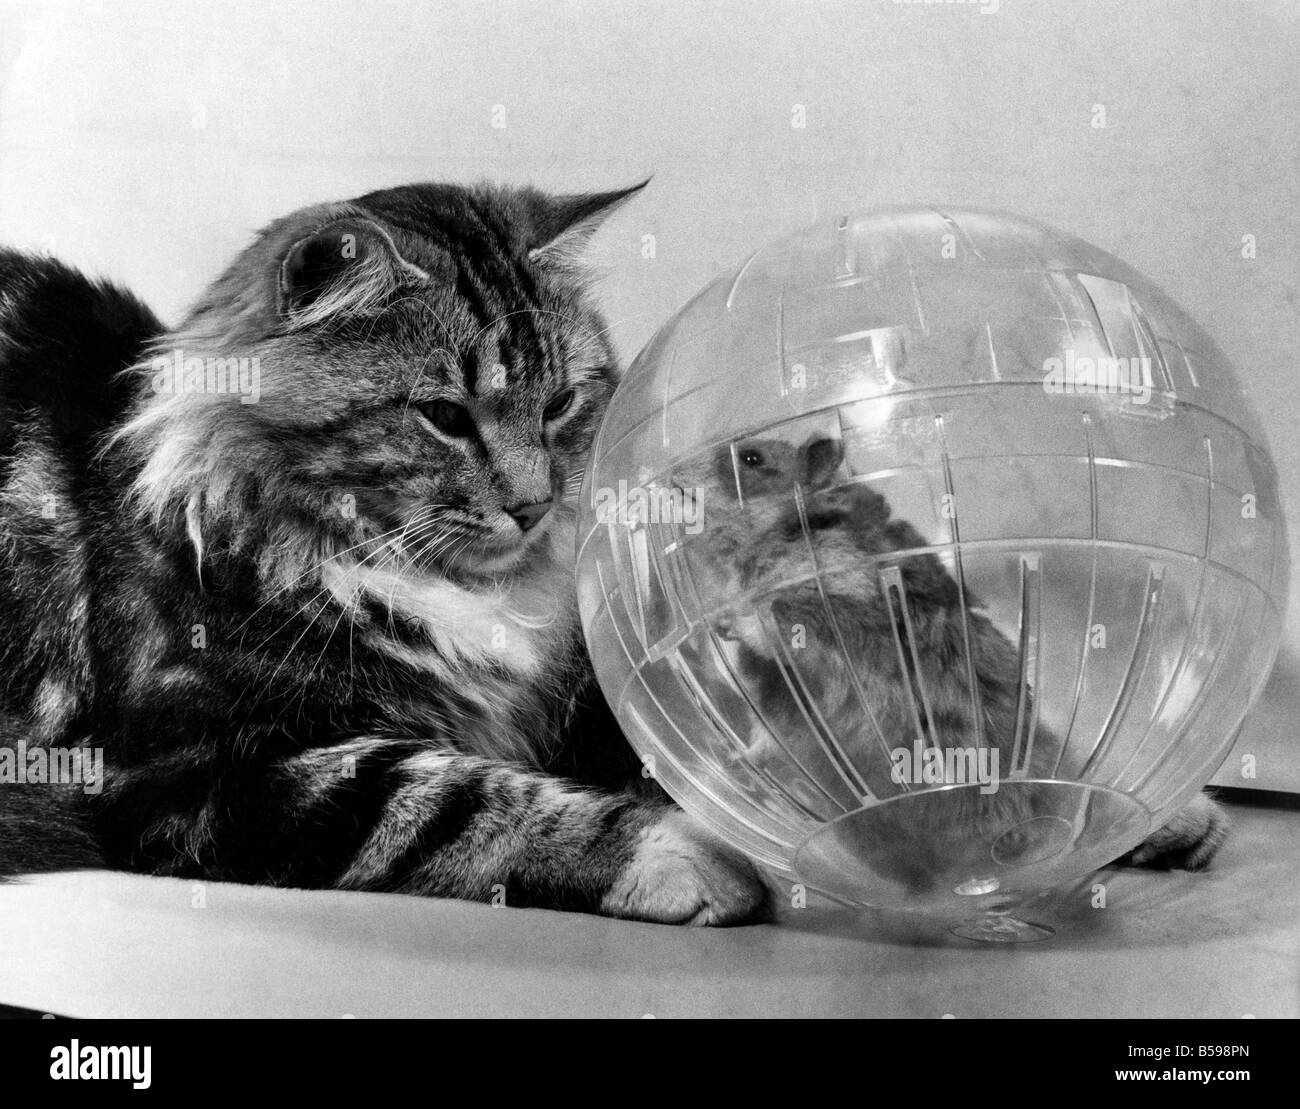 Hamster exercise ball, the exercise balls are only intended to be used for 10 or 15 minutes but that's ideal while the owner tidies up the hamster's home. This tabby cat is trying to figure out how the hamster got into the ball. January 1976 P007411 Stock Photo